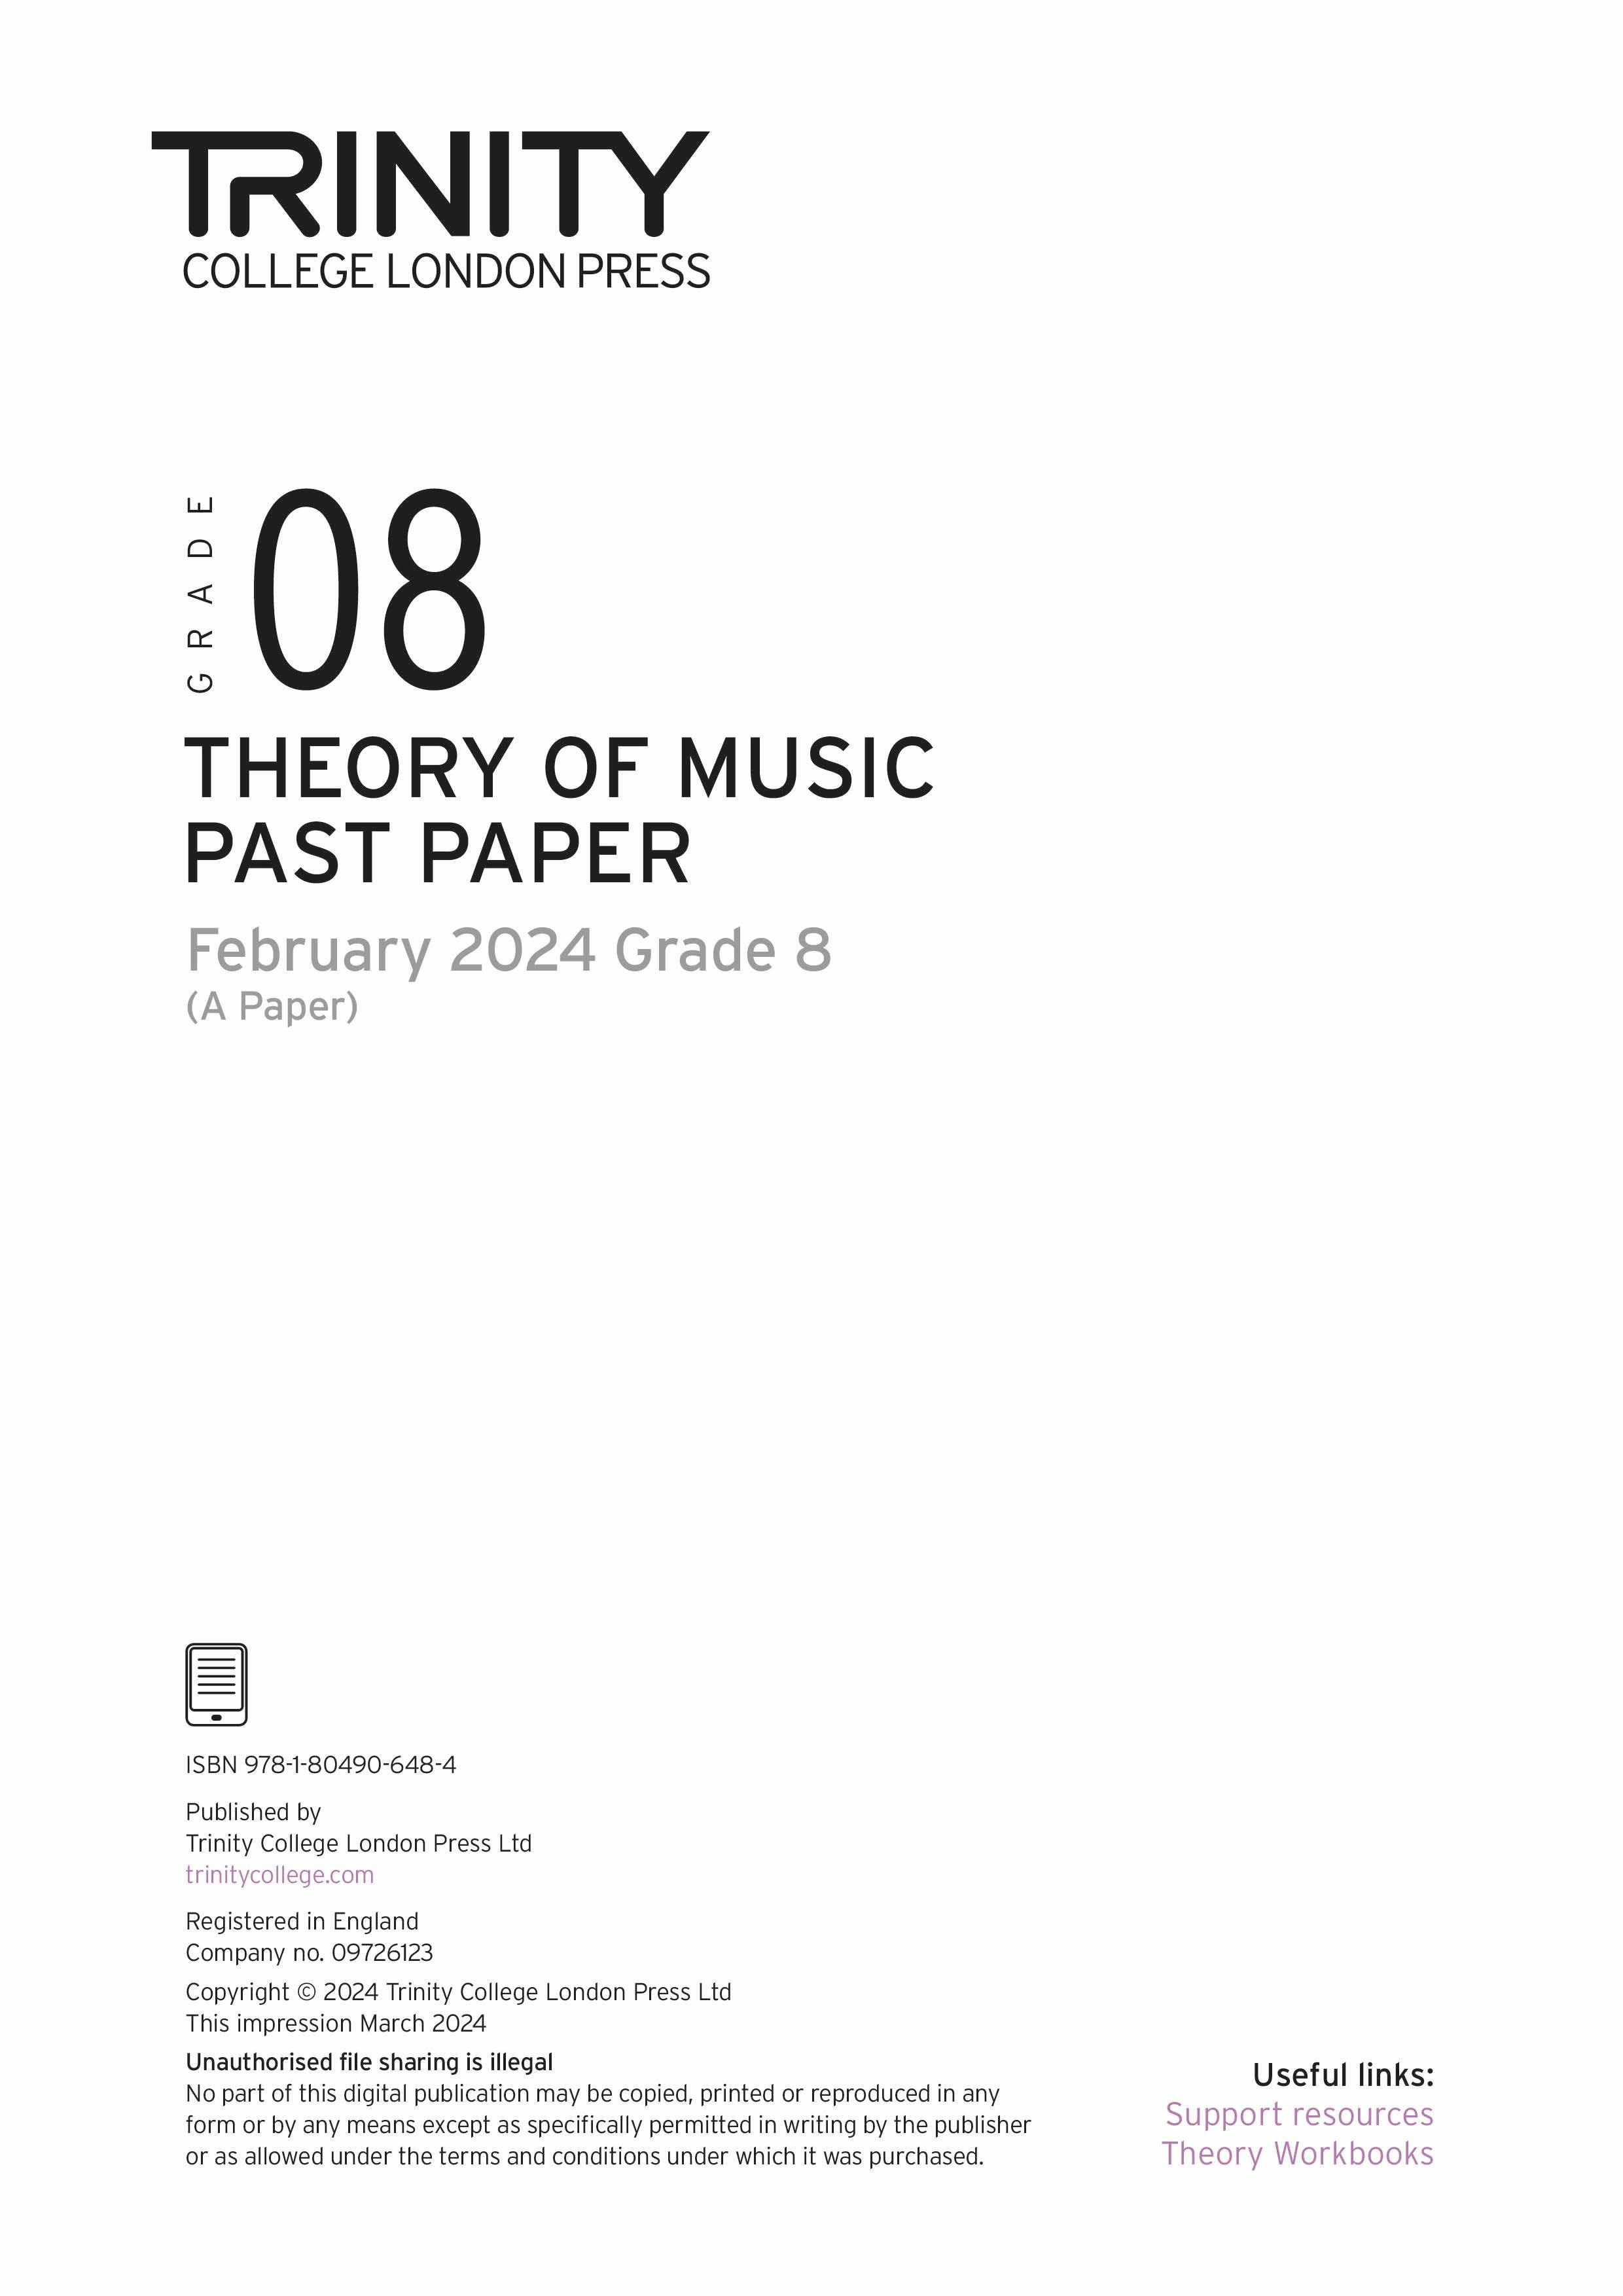 Theory of Music Past Paper 2024 February A: Grade 8 - ebook